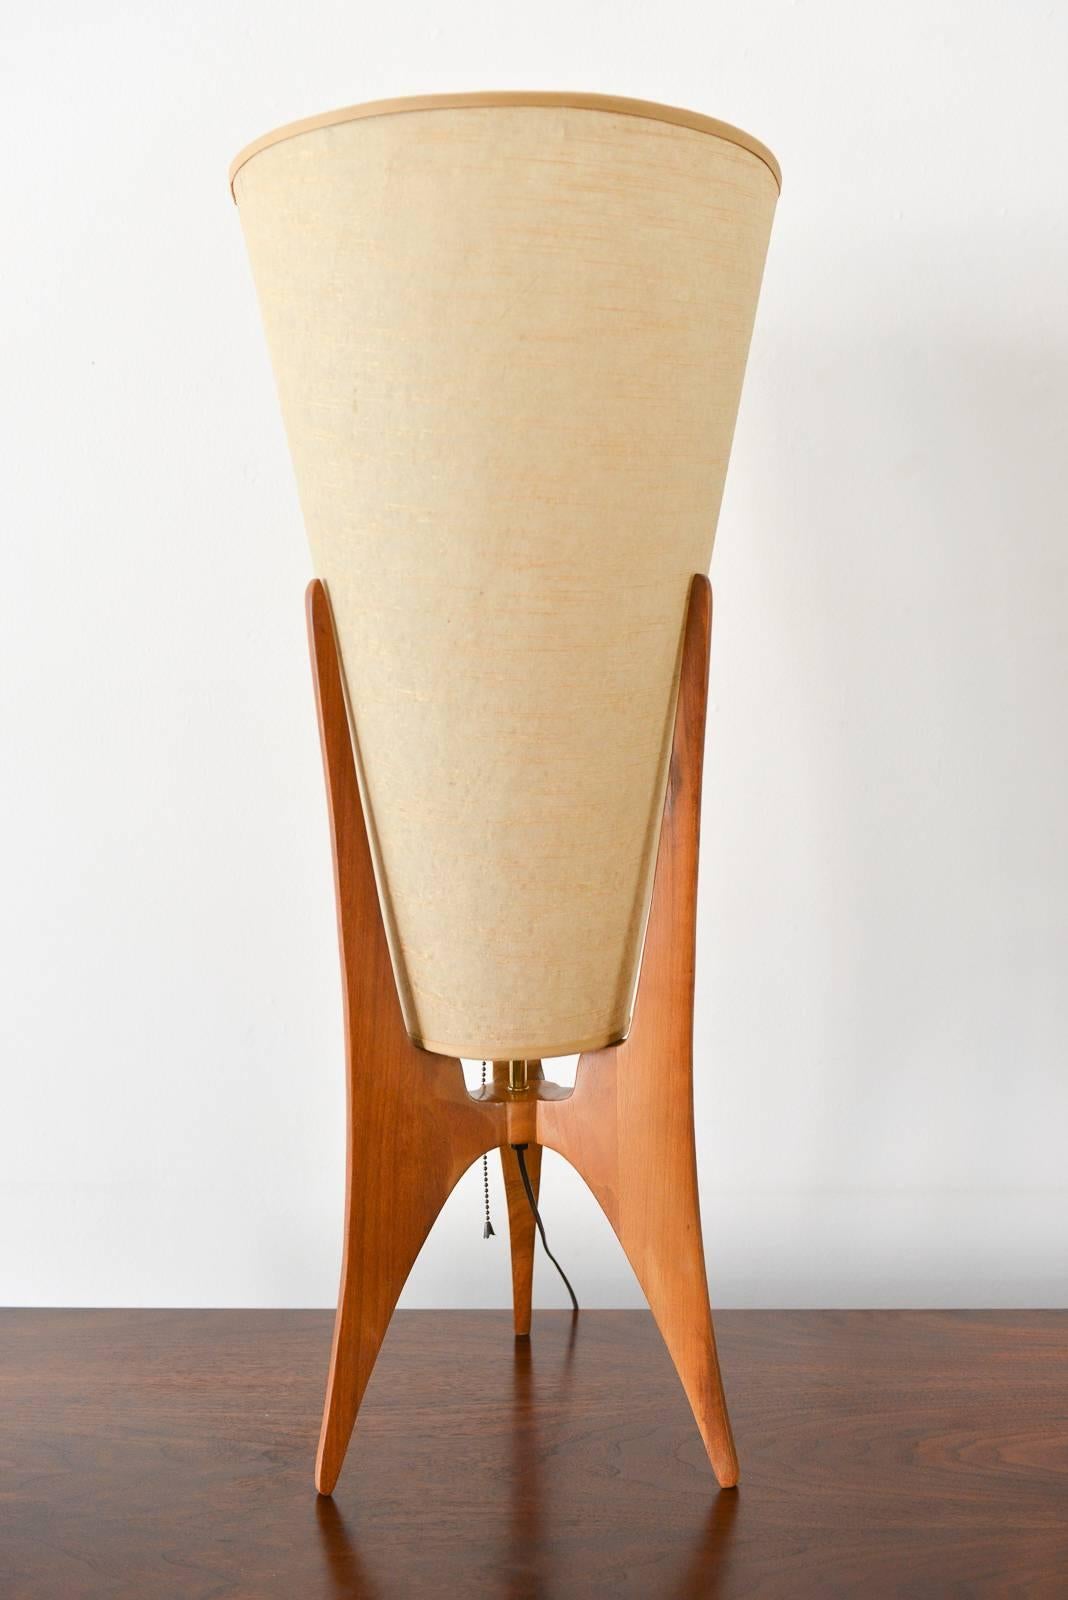 Atomic tripod table lamp with original grasscloth shade, circa 1959. Wood base with brass detailing and original grasscloth shade. Original wiring, working condition. 

Available to see in our Modern Vault Showroom, 361 Old Newport Blvd, Newport